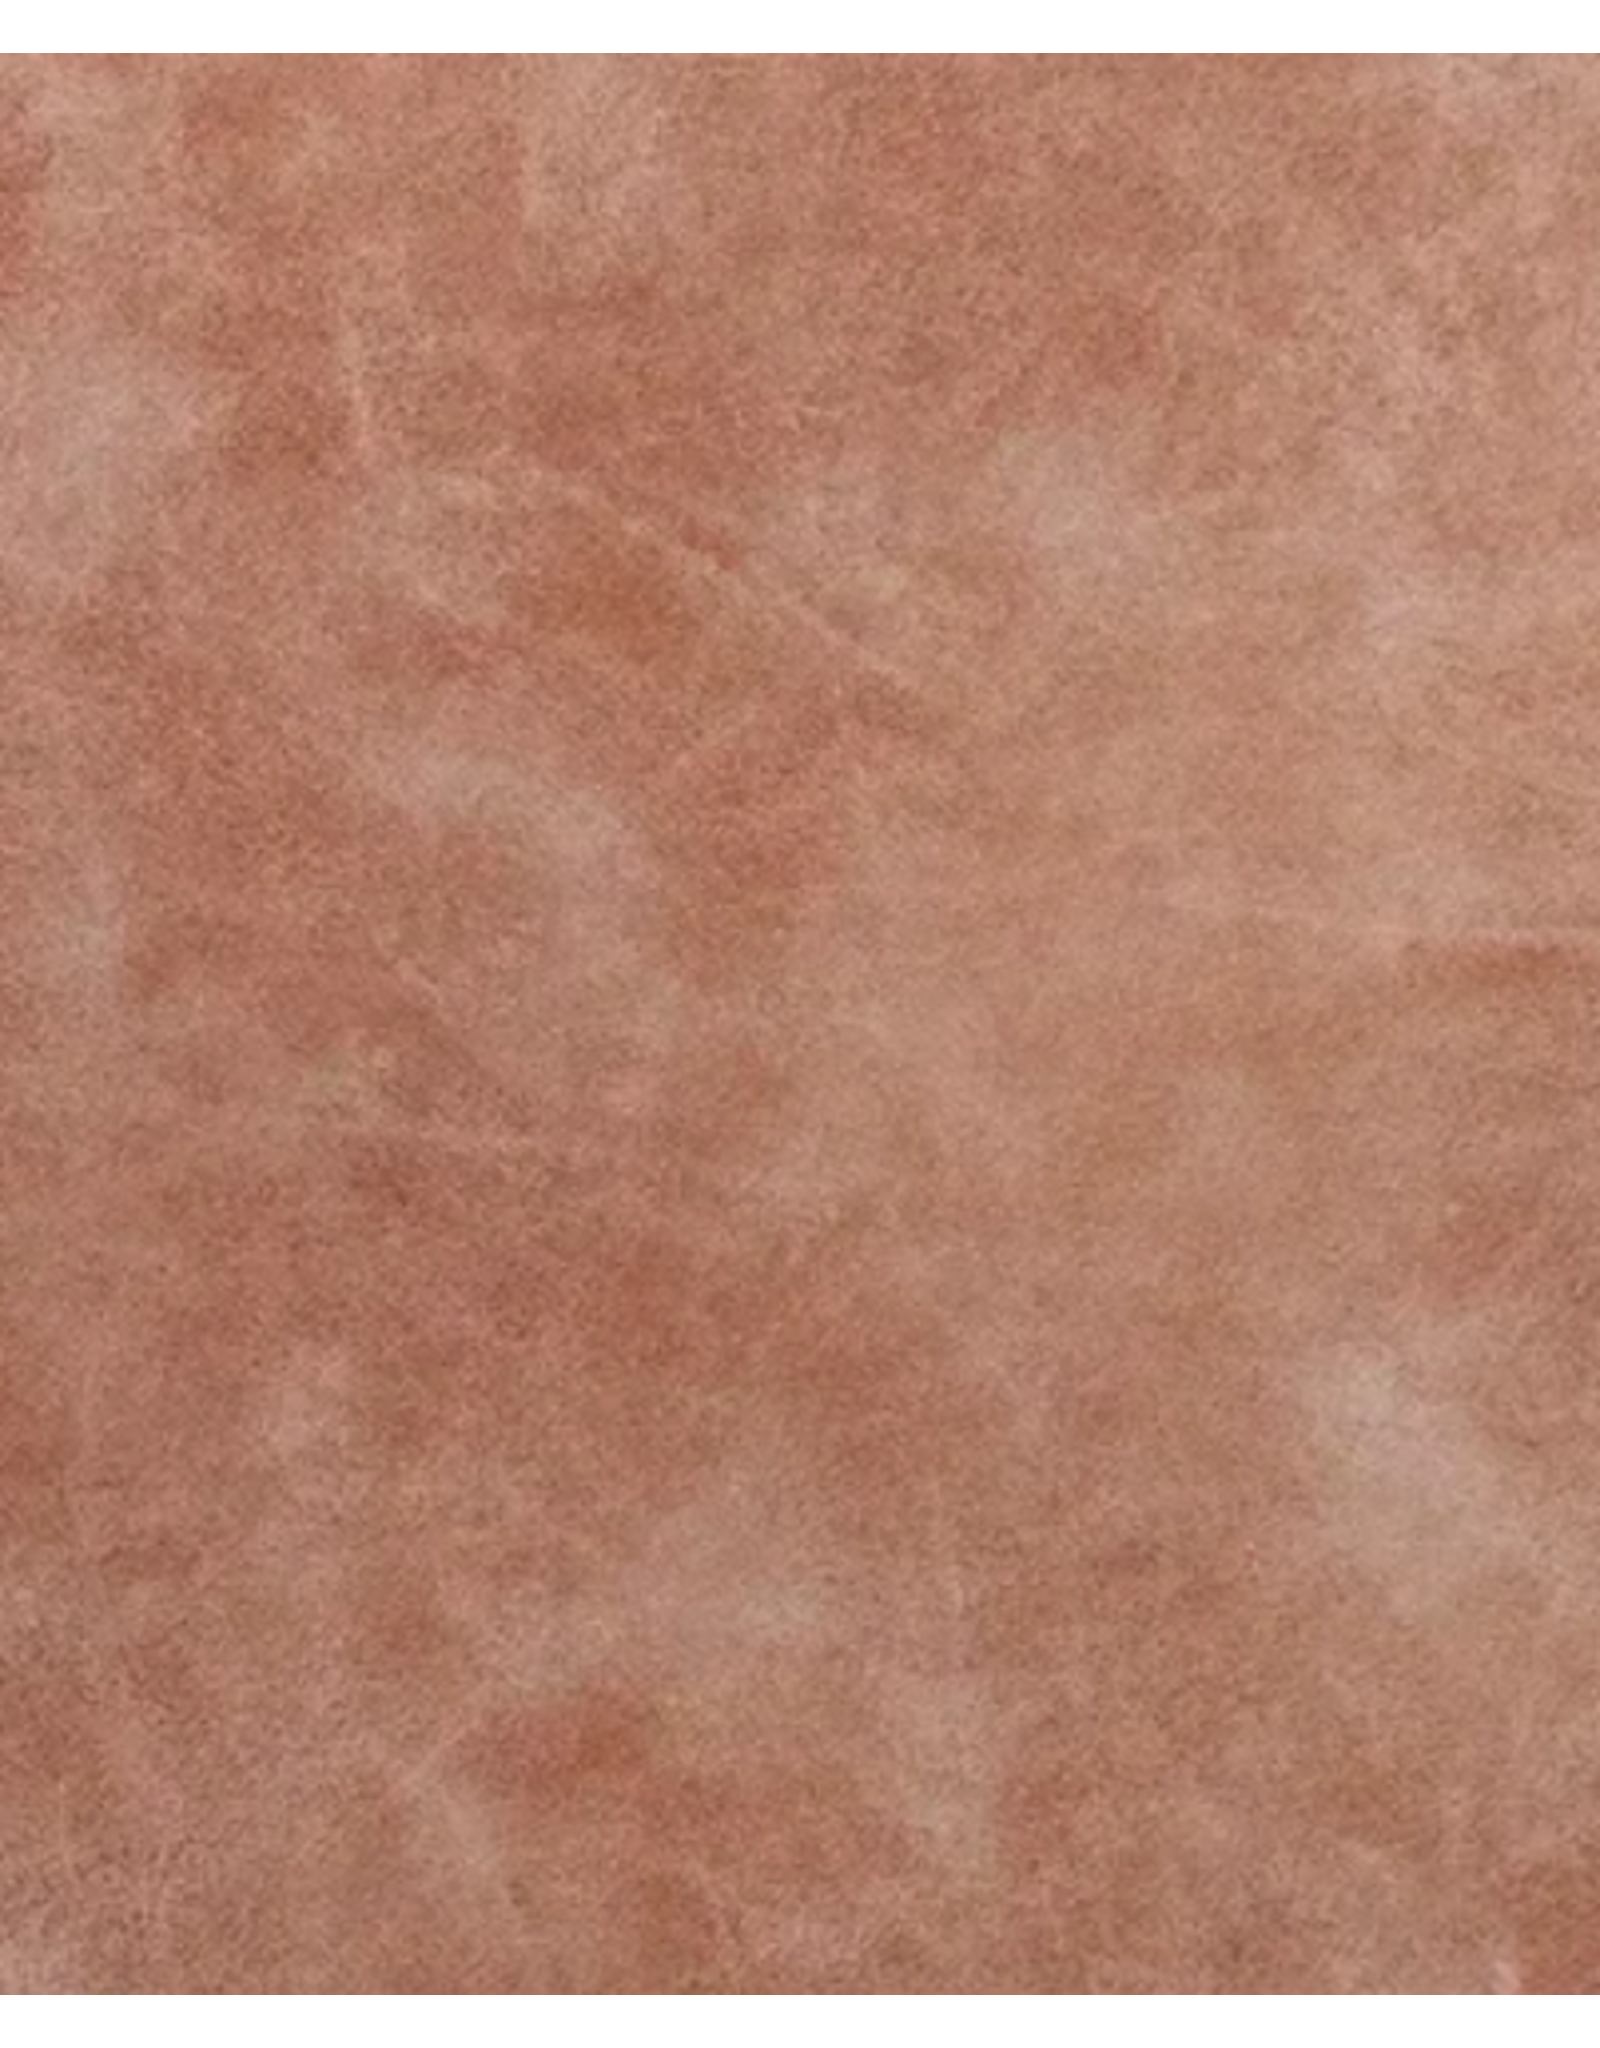 Faux Leather Beading Backing Peach Suede   .8mm thick 8x11"